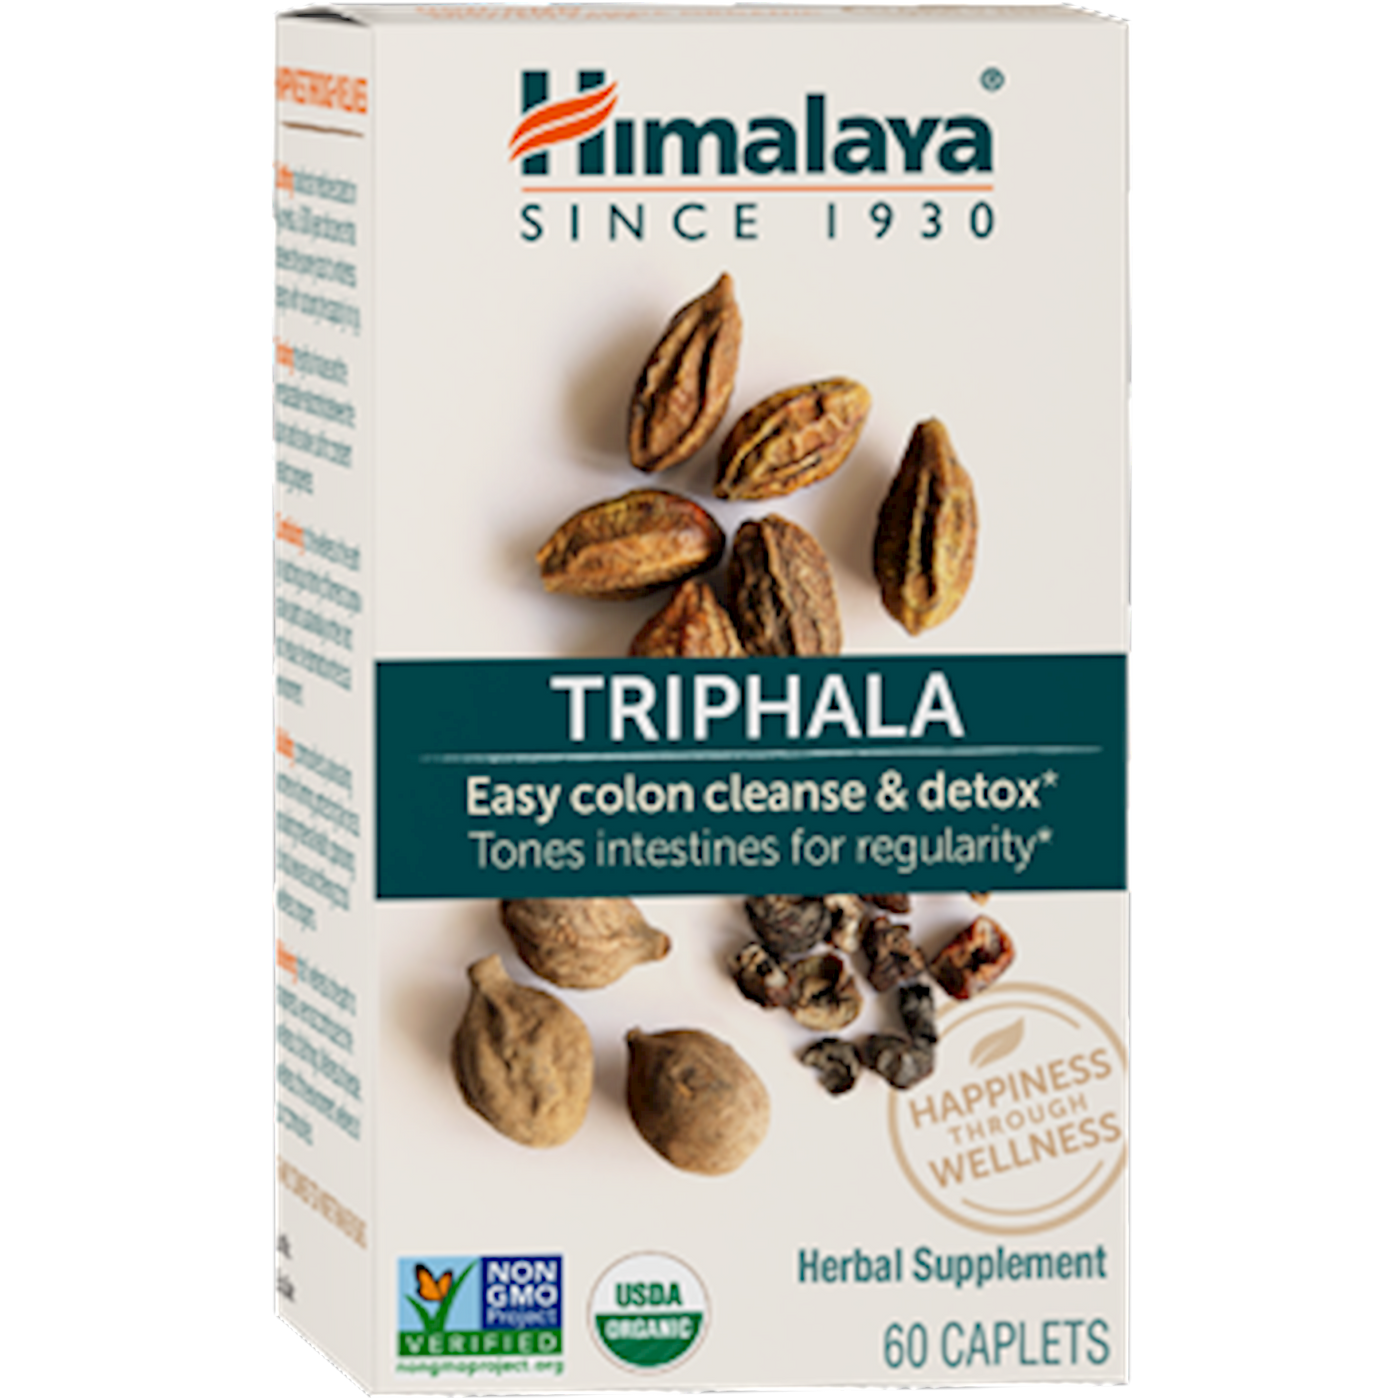 Triphala 60 caps Curated Wellness